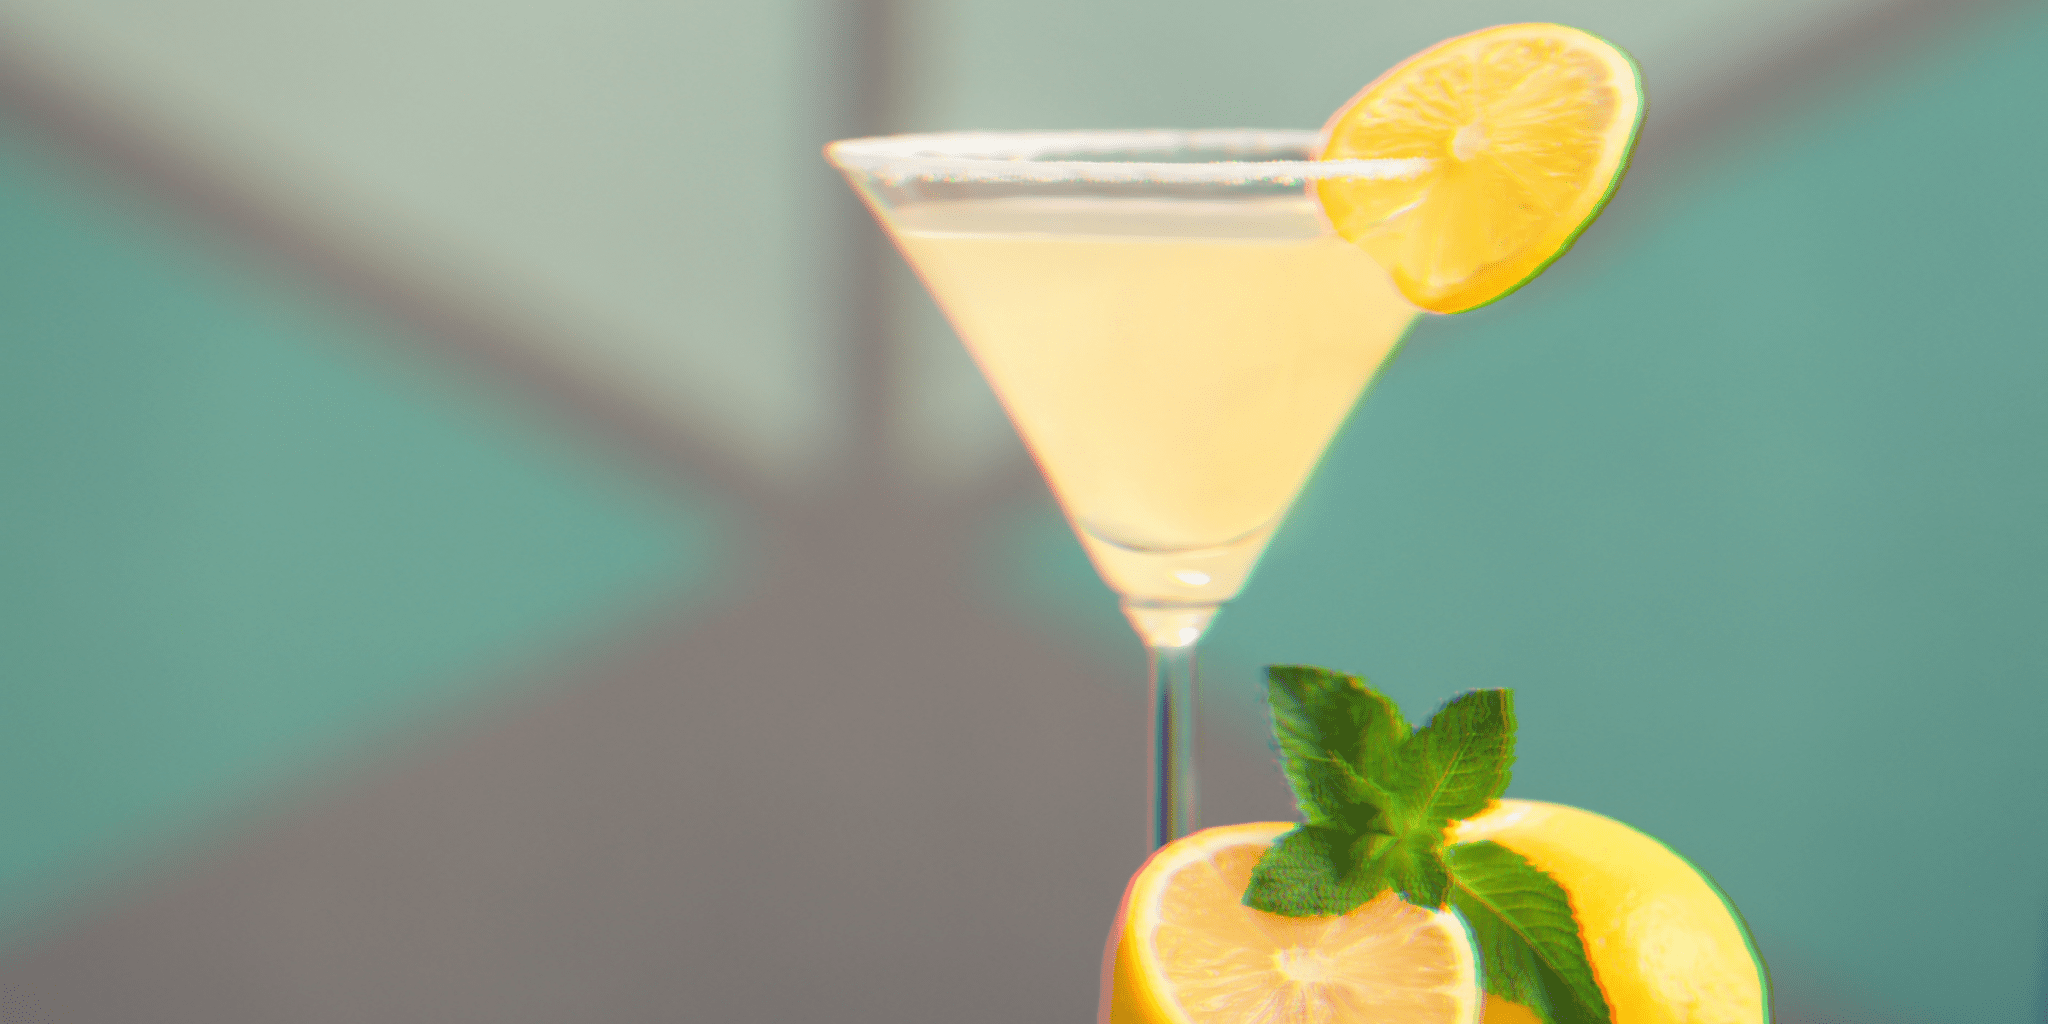 citrus lemon drop vodka drink in martini glass against blue wall with retro wallpaper